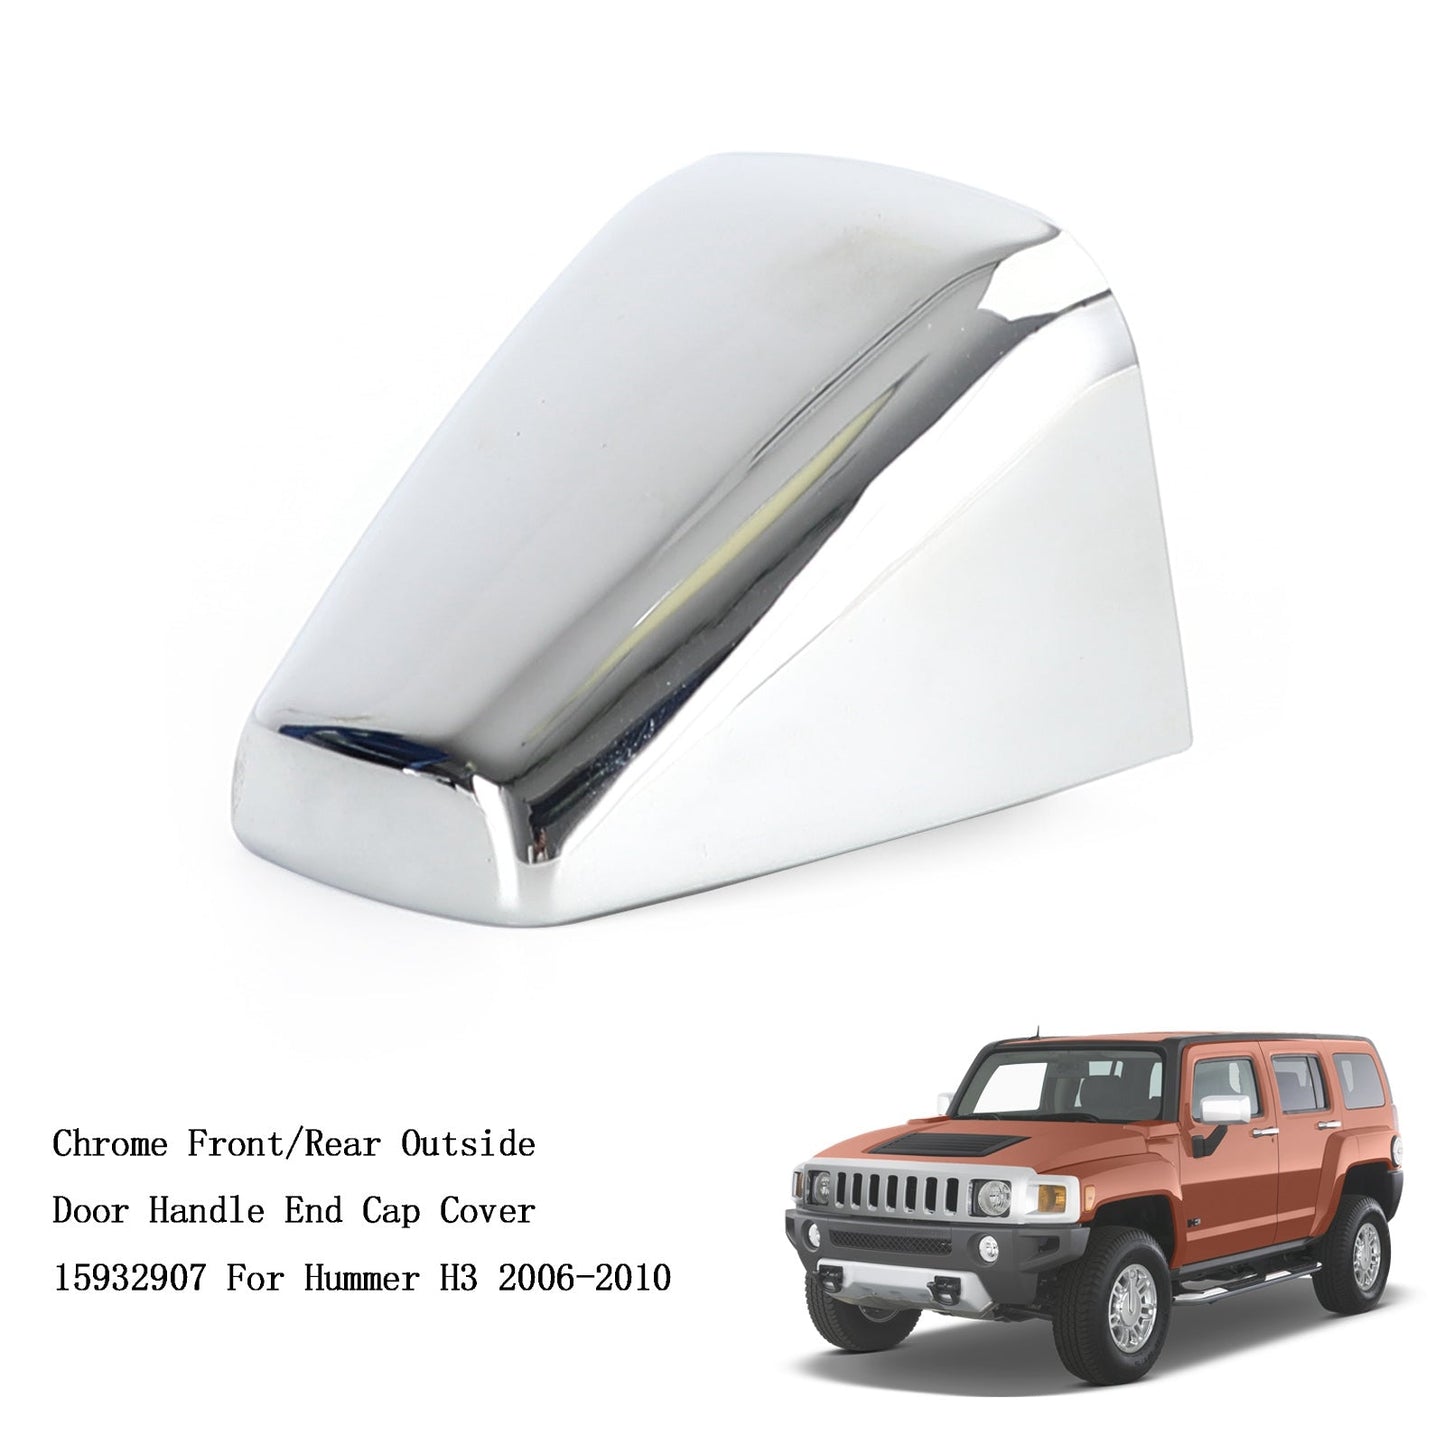 Chrome Front/Rear Outside Door Handle End Cap Cover For Hummer H3 2006-2010